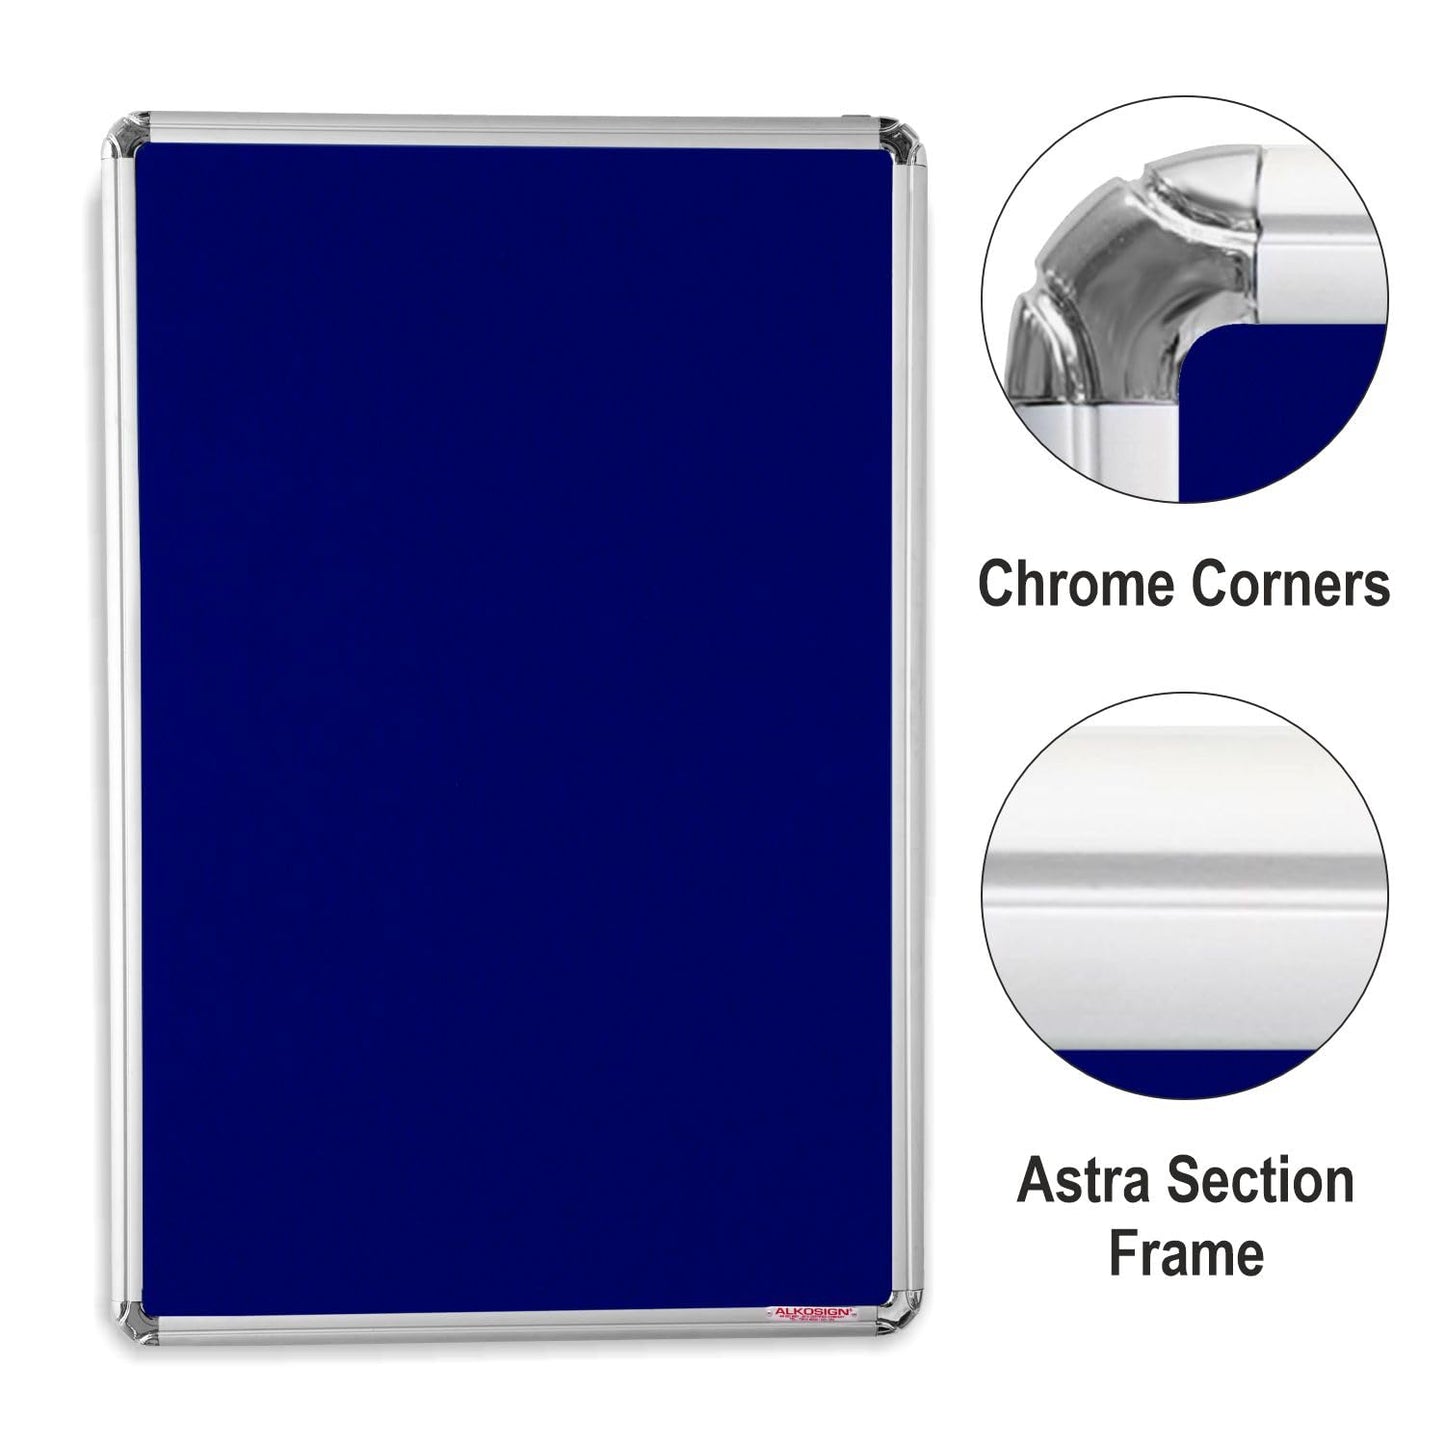 Digismart Noticeboard Classic Channel (Blue) for Office, Home & School Aluminum (Pack of 1) (Non Magnetic)